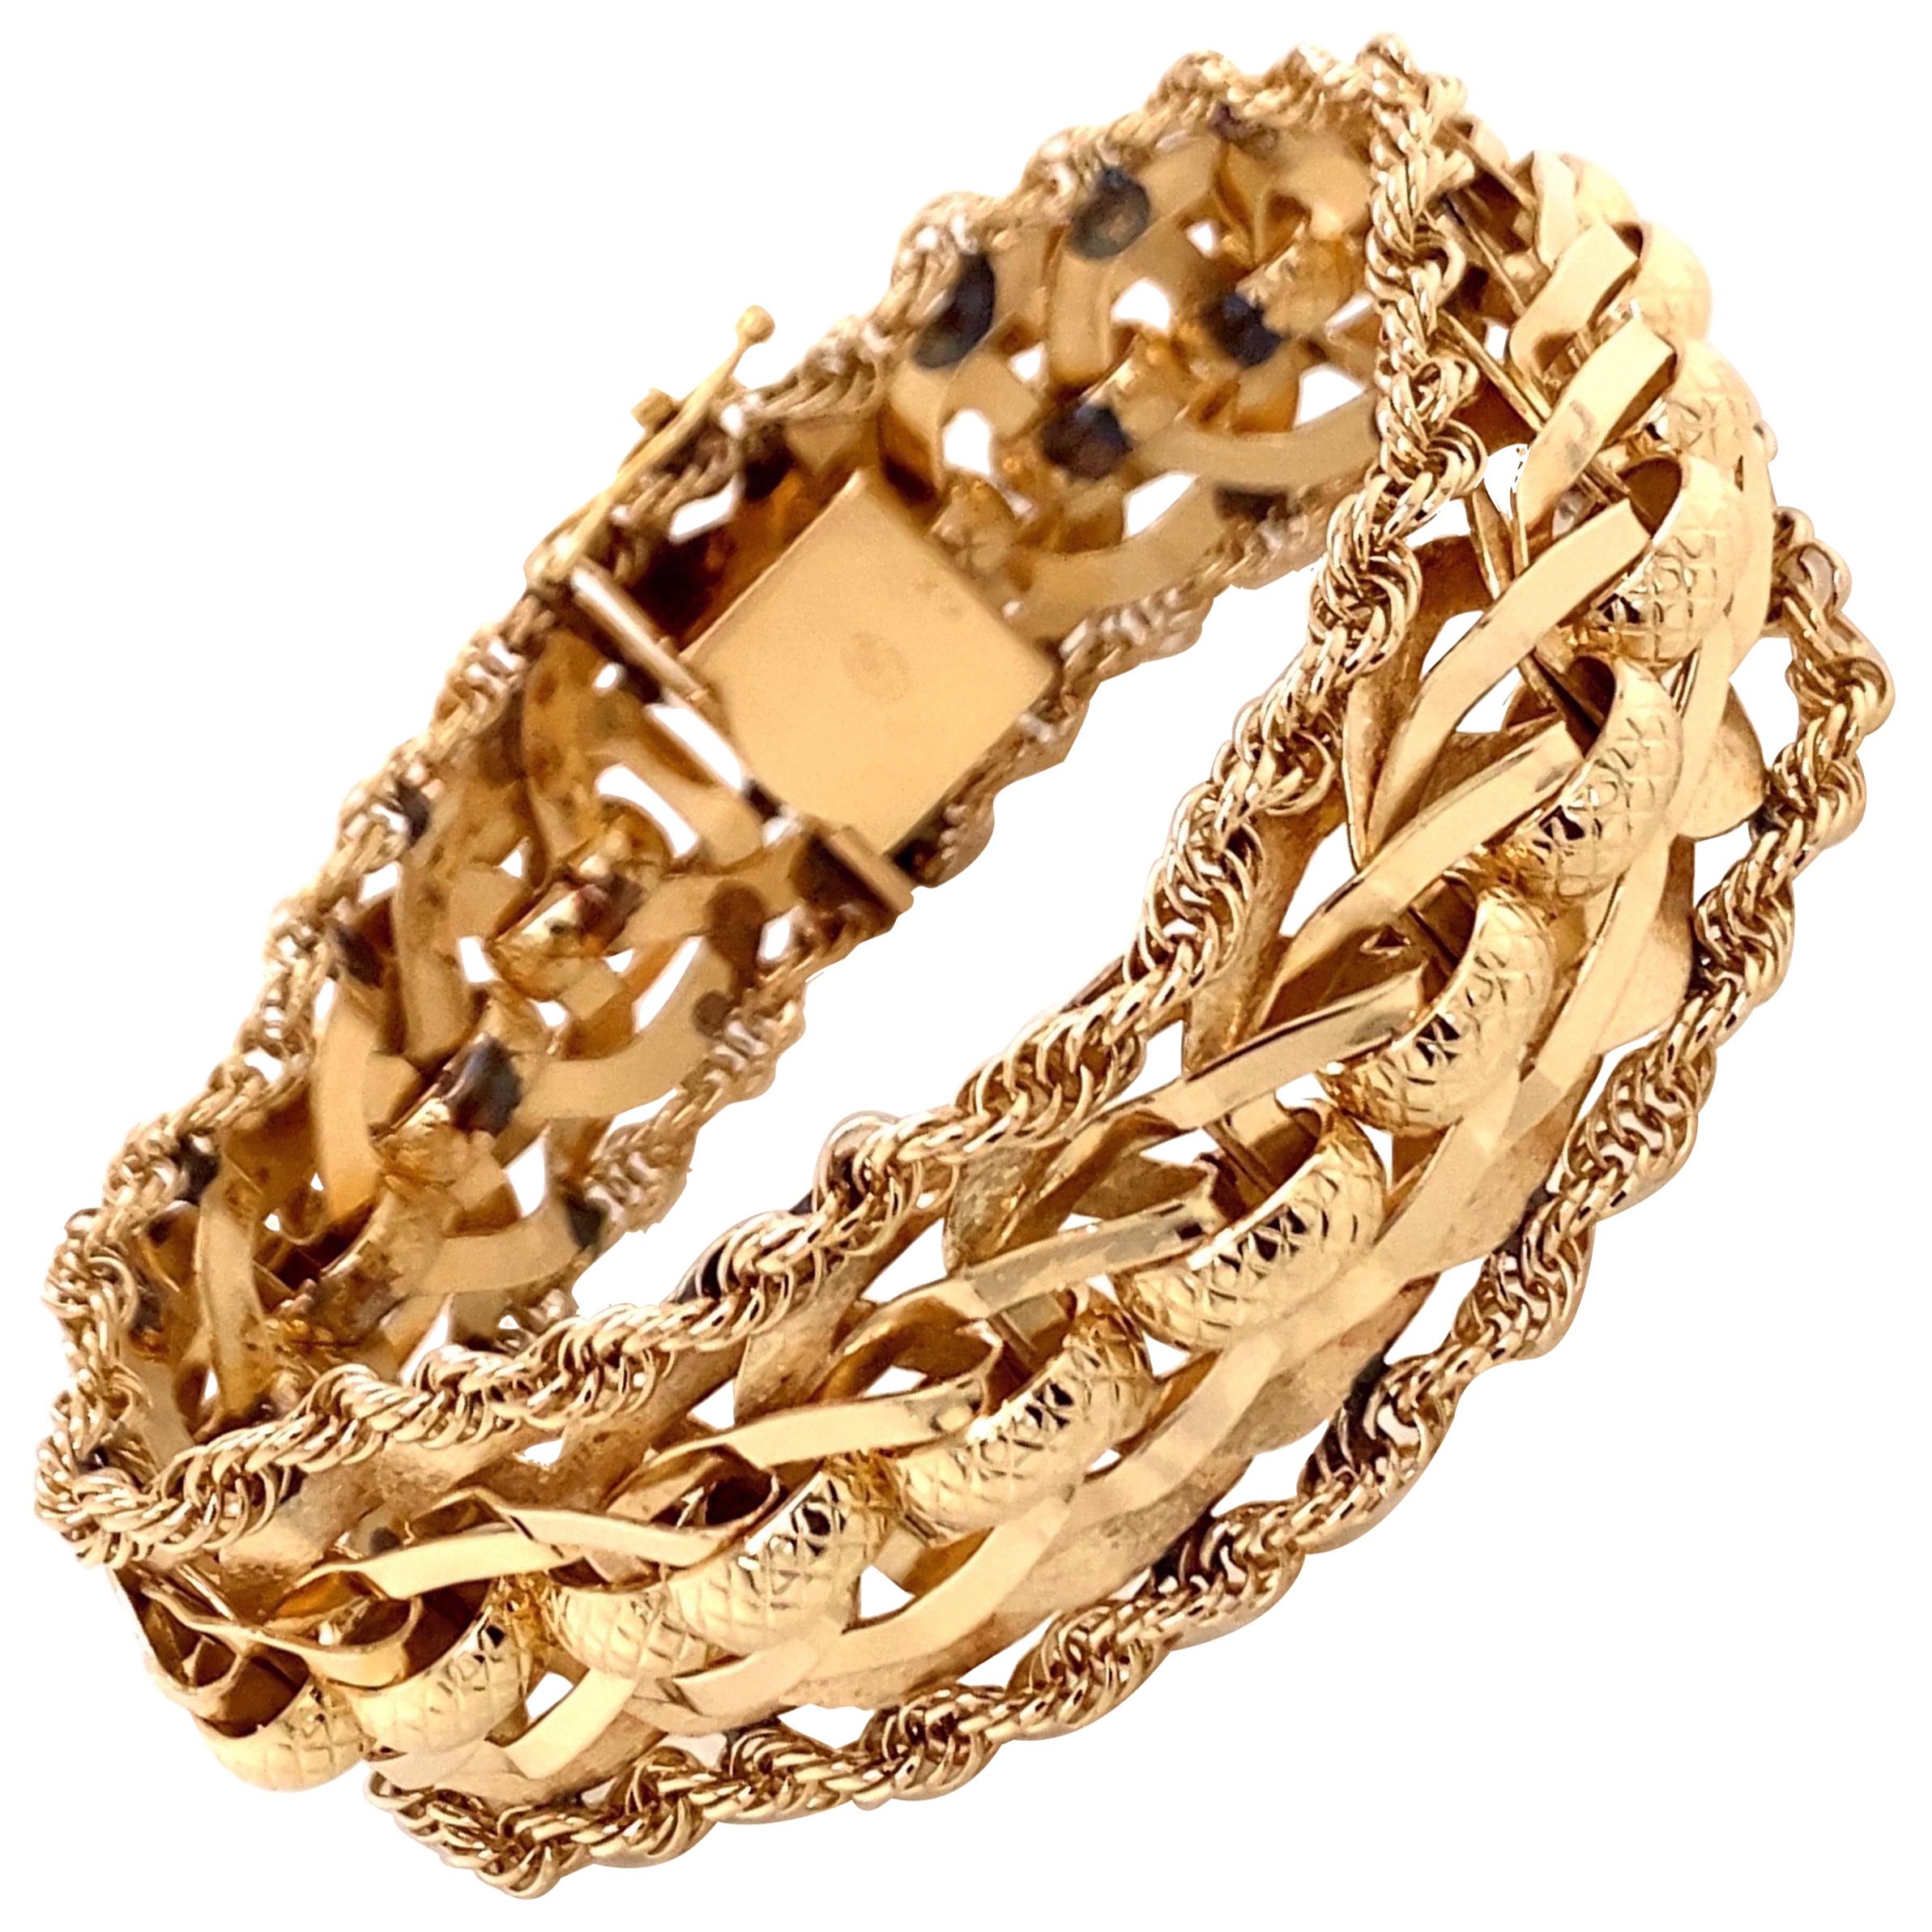 5 Beautiful Gold Bangles Design For Party Wear!